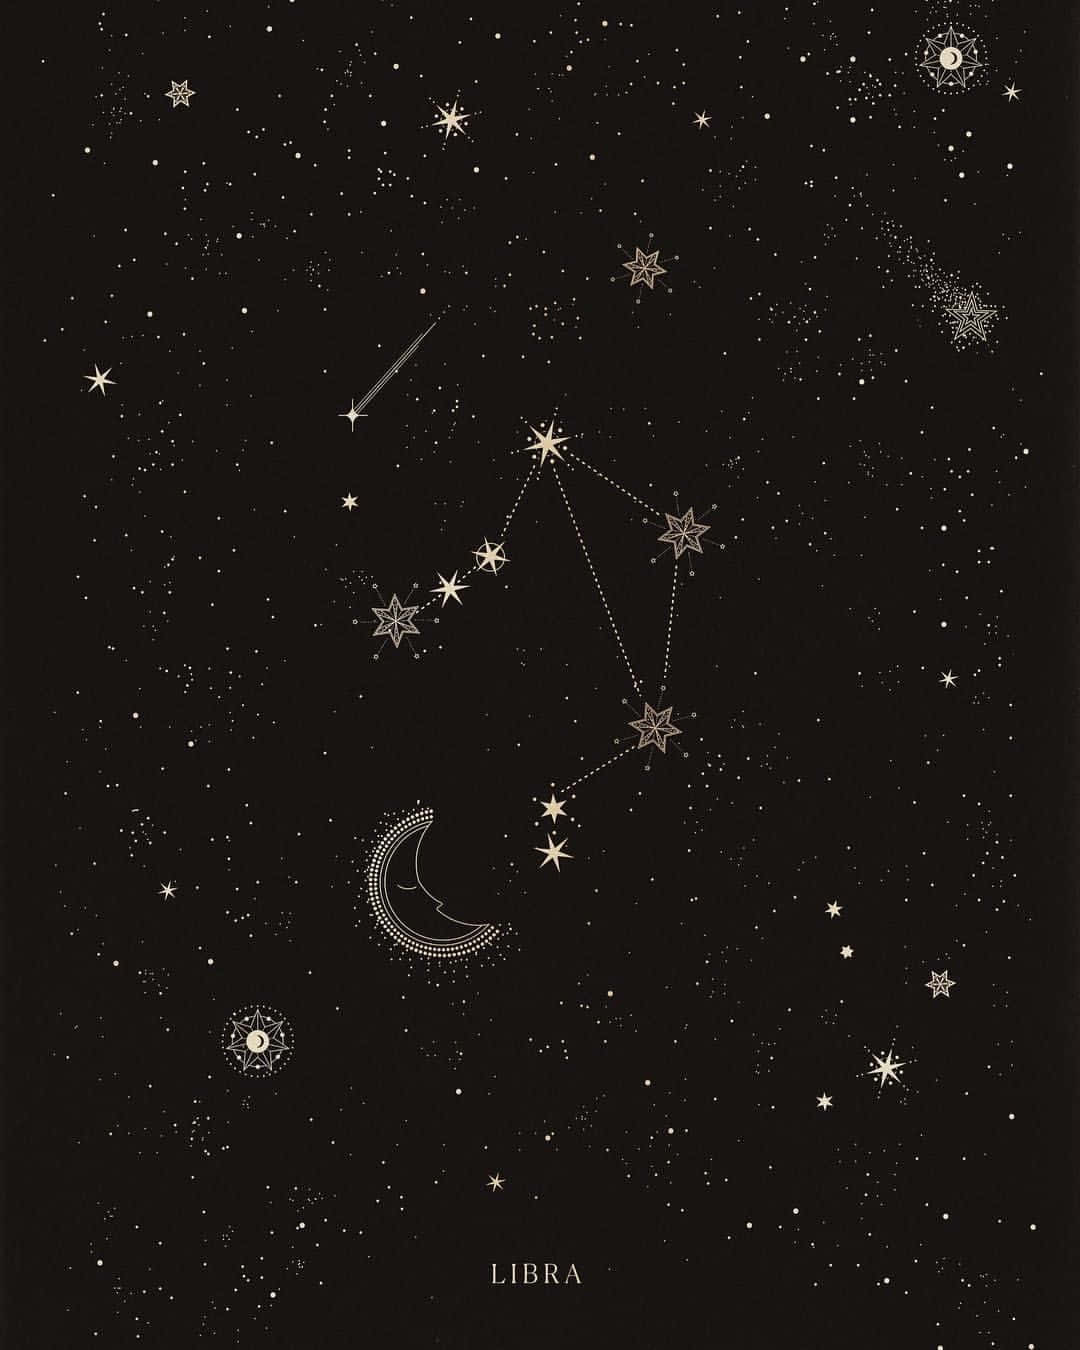 Celestial Guide: The Constellations in the Night Sky Wallpaper